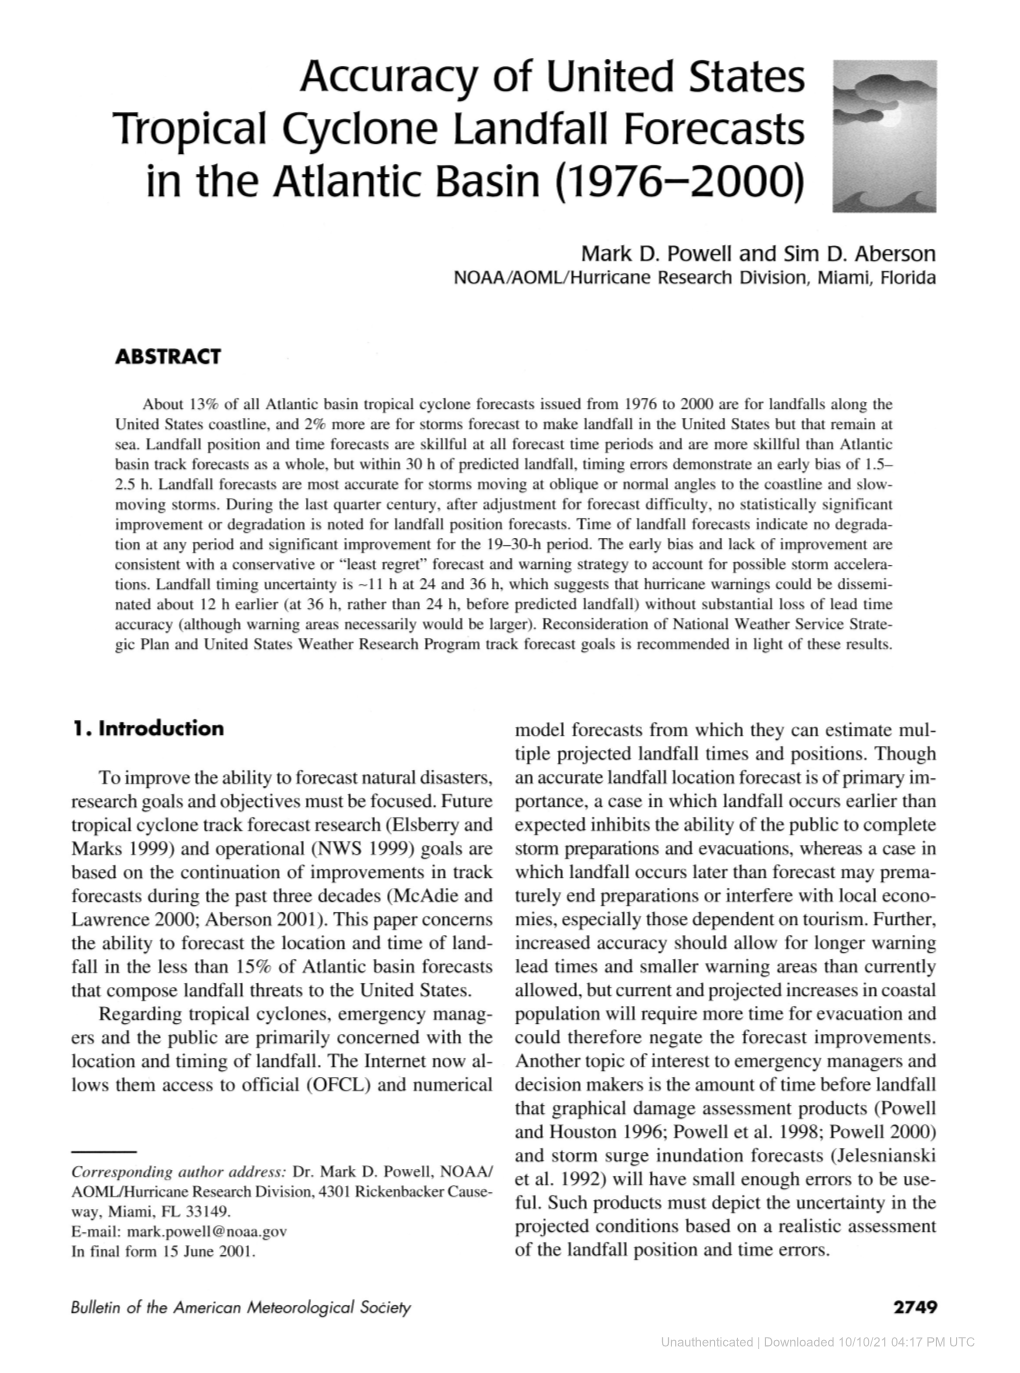 Accuracy of United States Tropical Cyclone Landfall Forecasts in the Atlantic Basin (1976-2000)